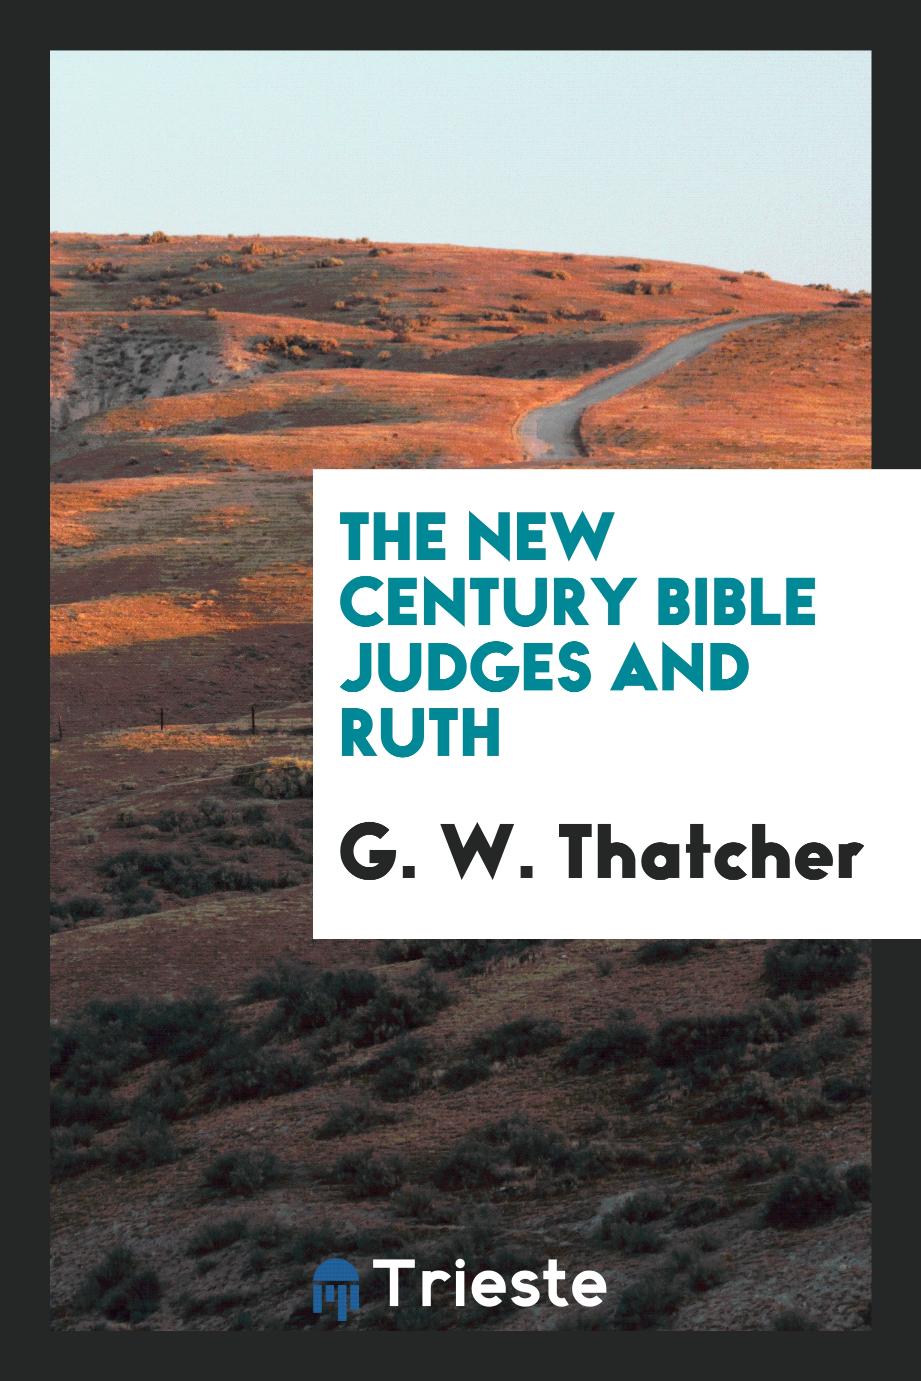 The New Century Bible Judges and Ruth